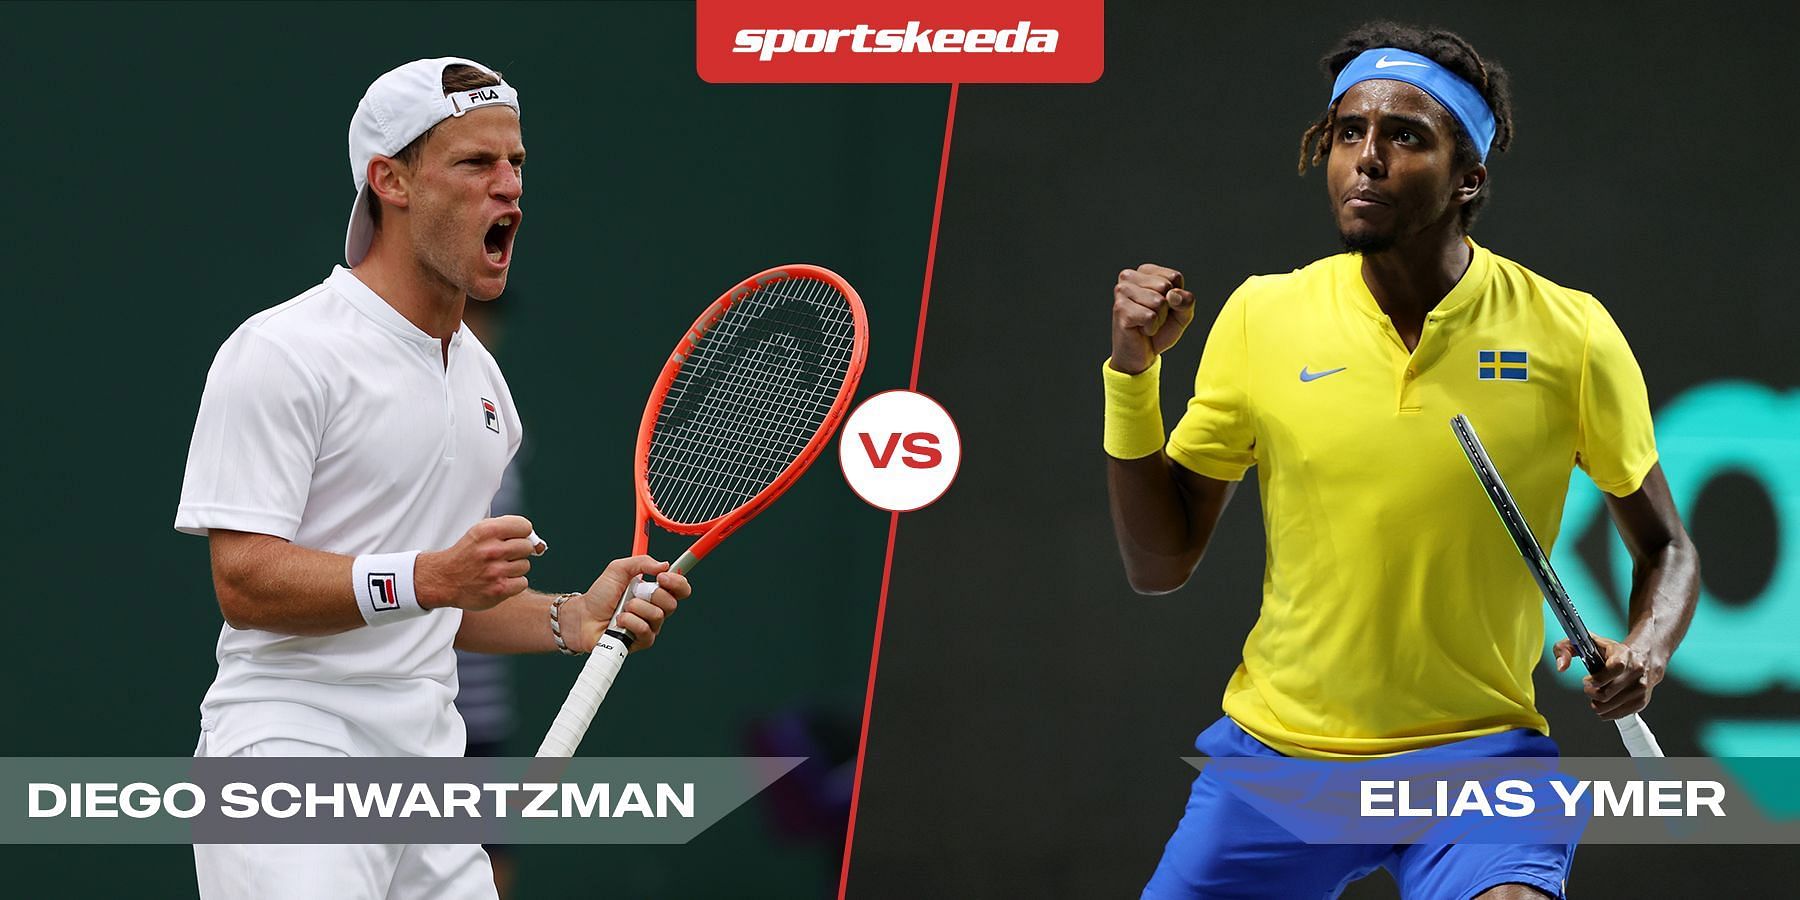 Schwartzman (L) will face Elias Ymer in the second round of the Nordea Open